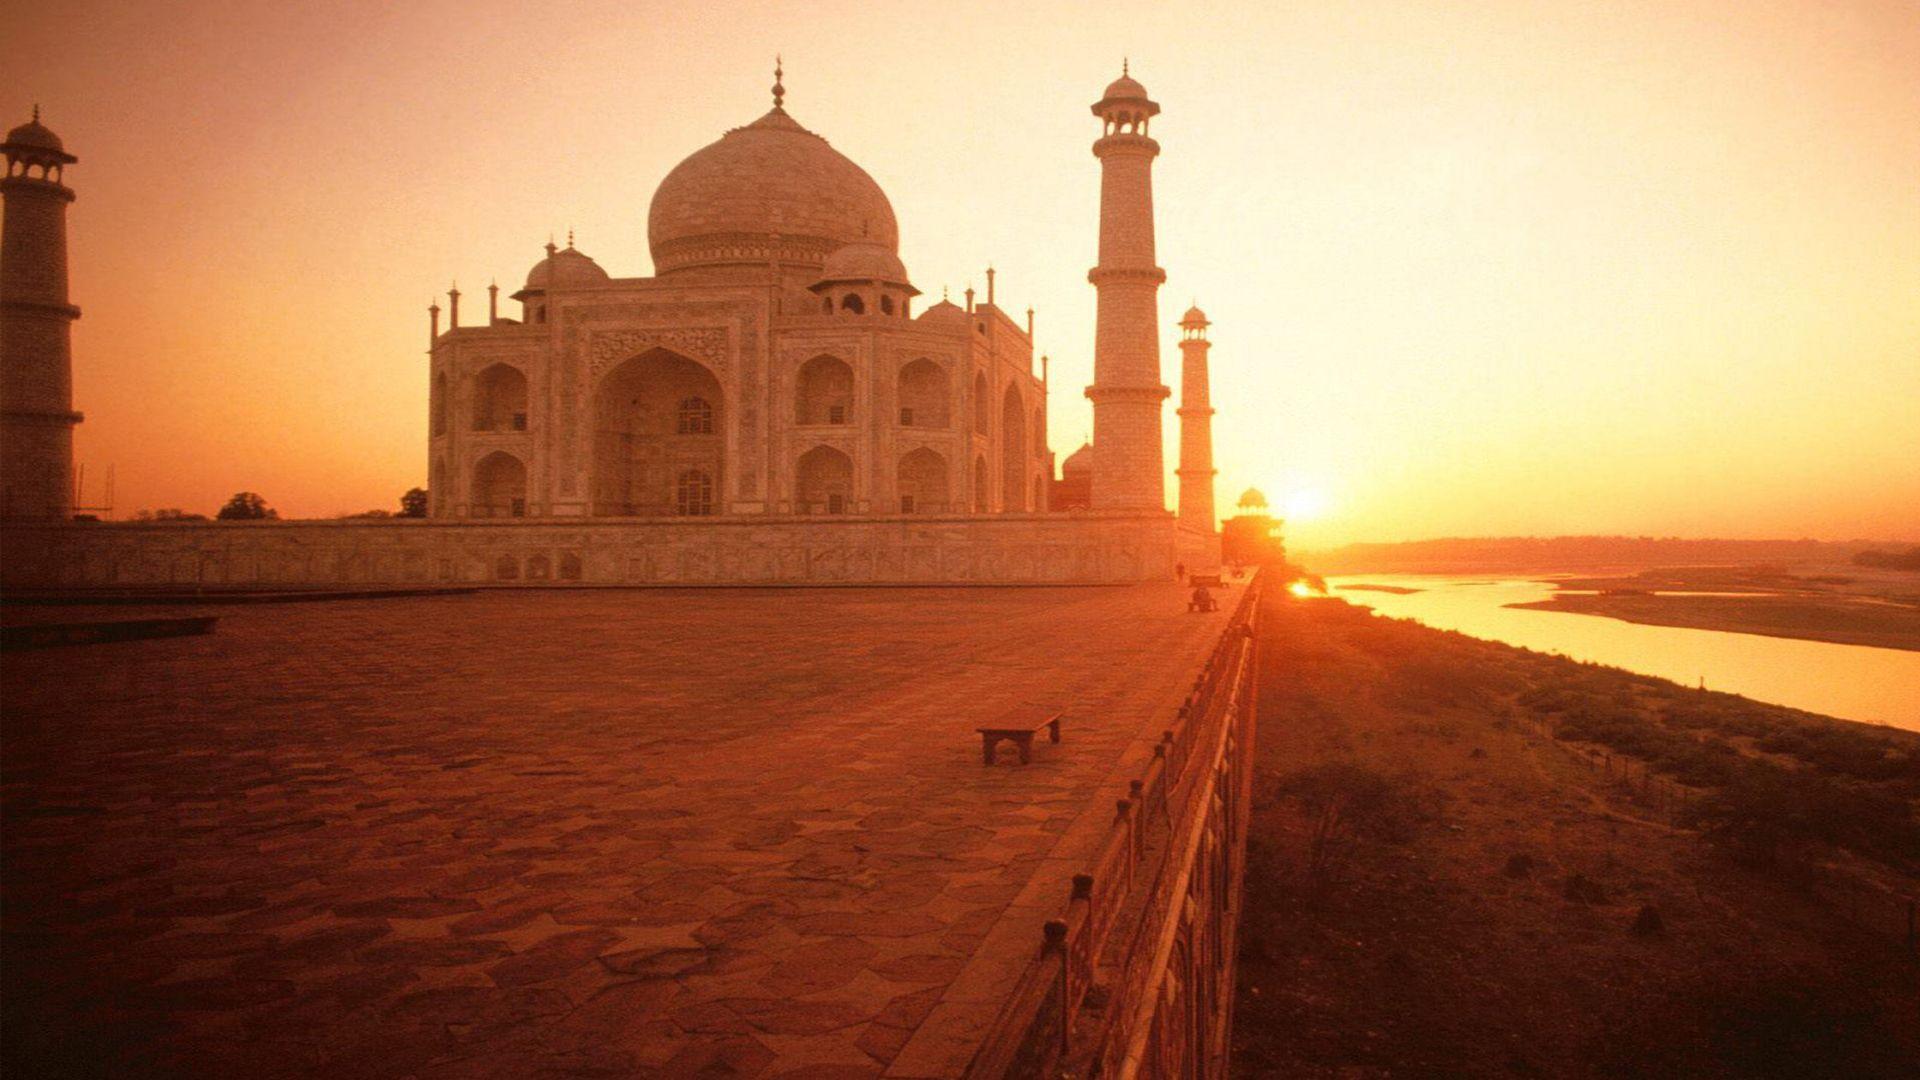 beautiful india. hey there Delilah